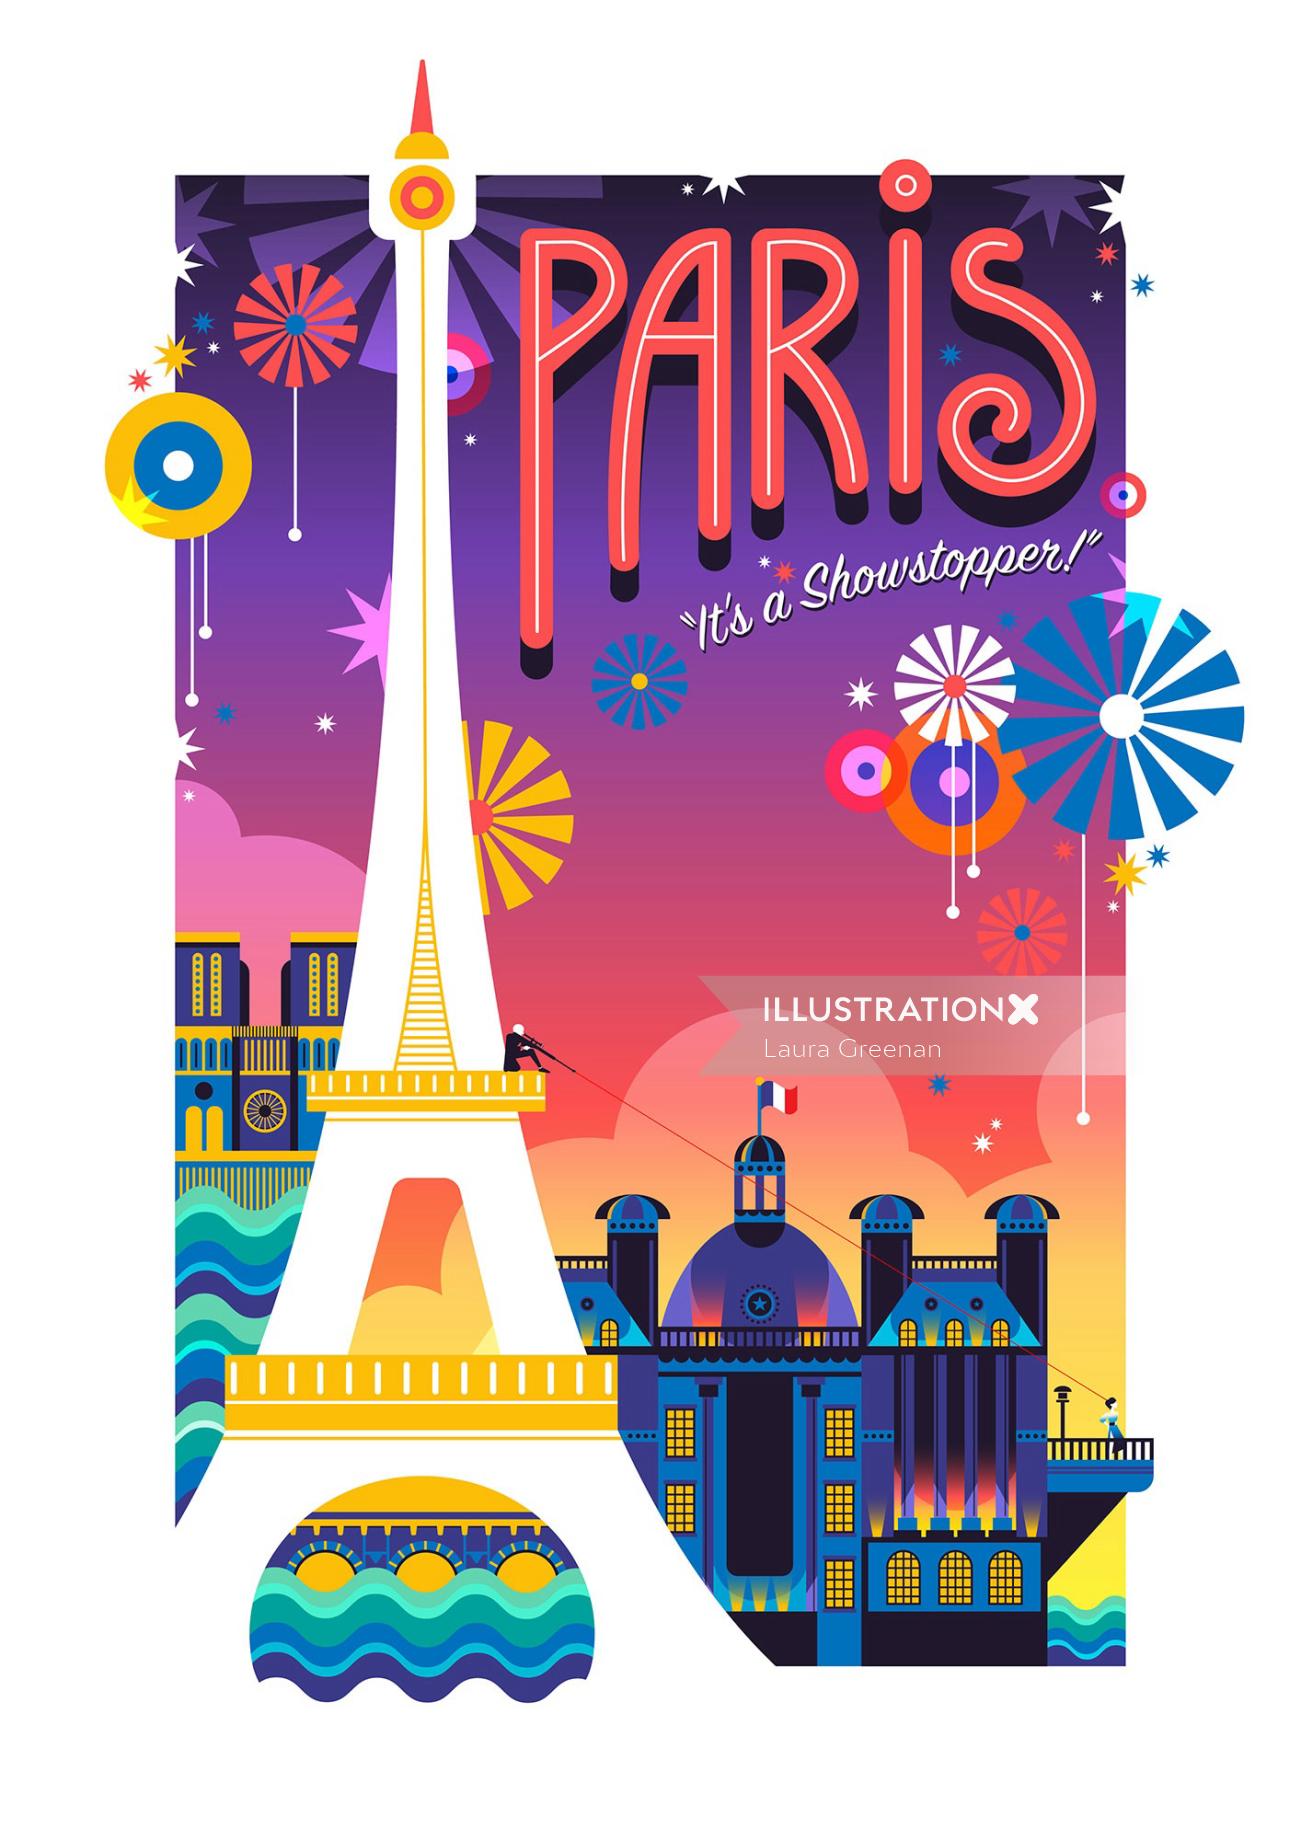 A travel poster for Paris, France created in a pop art colourful and vibrant style.